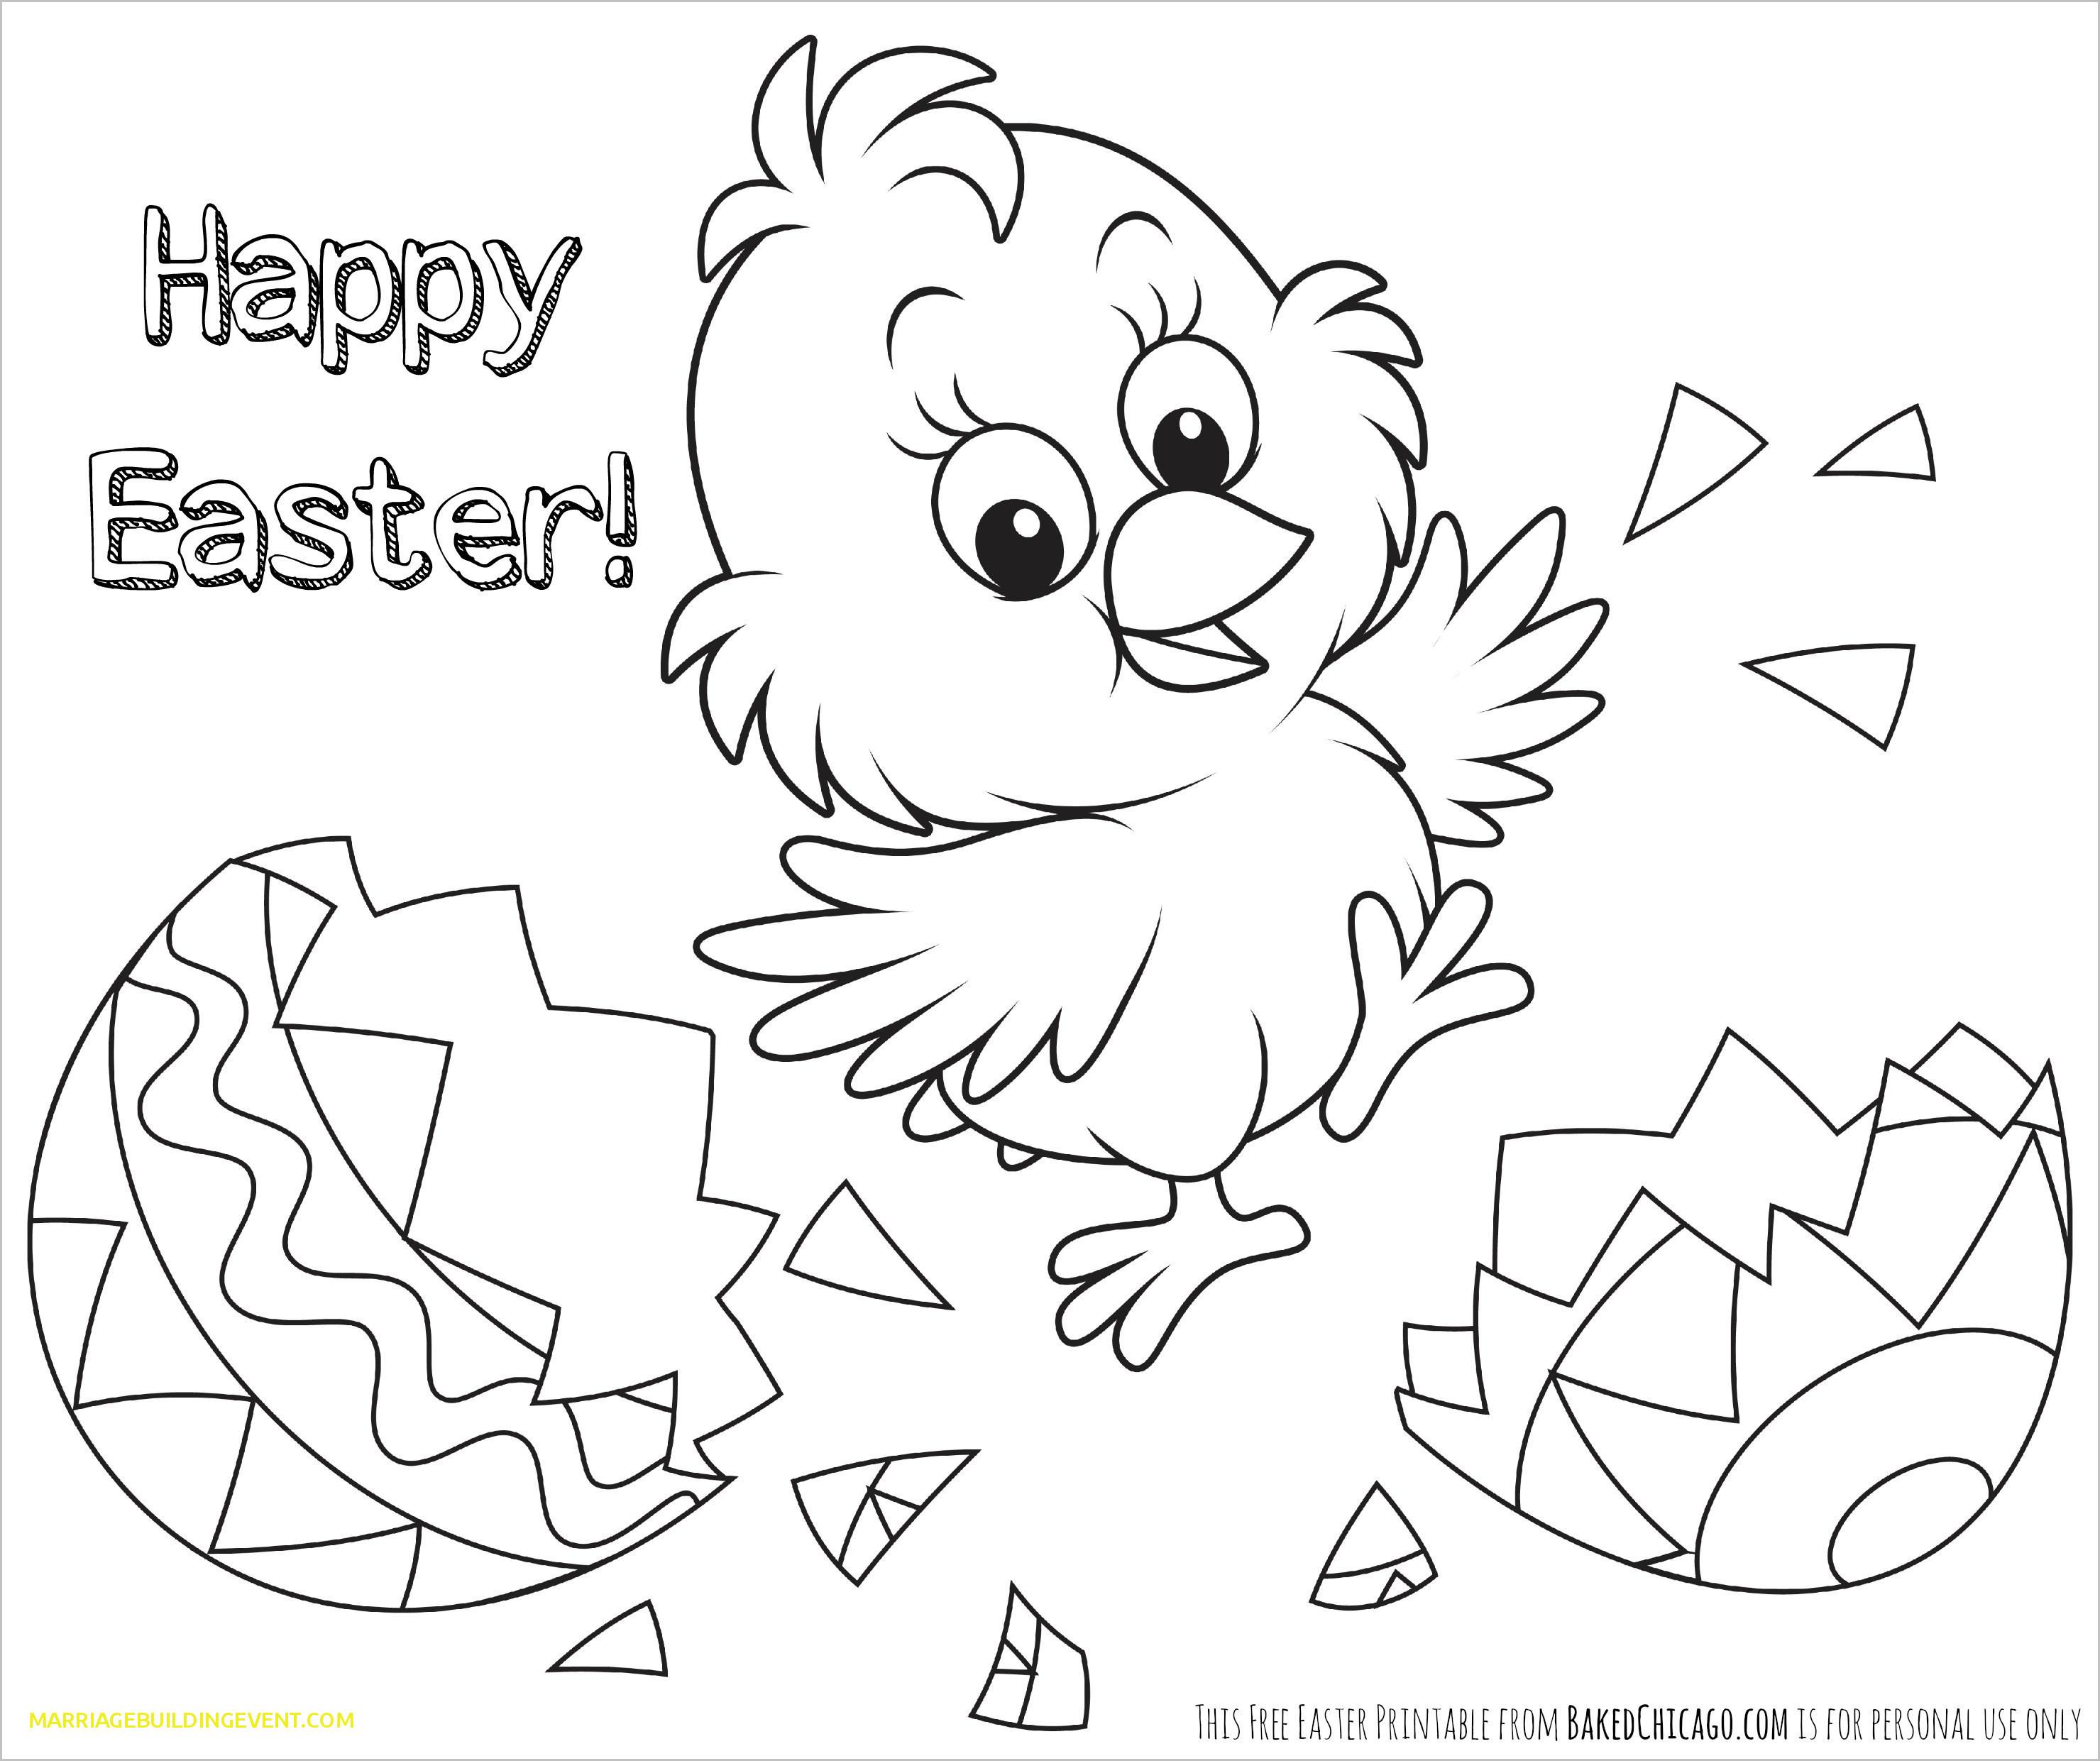 Beau Easter Coloring Pages For Kids To Print | Marriagebuildingevent - Free Printable Easter Pages